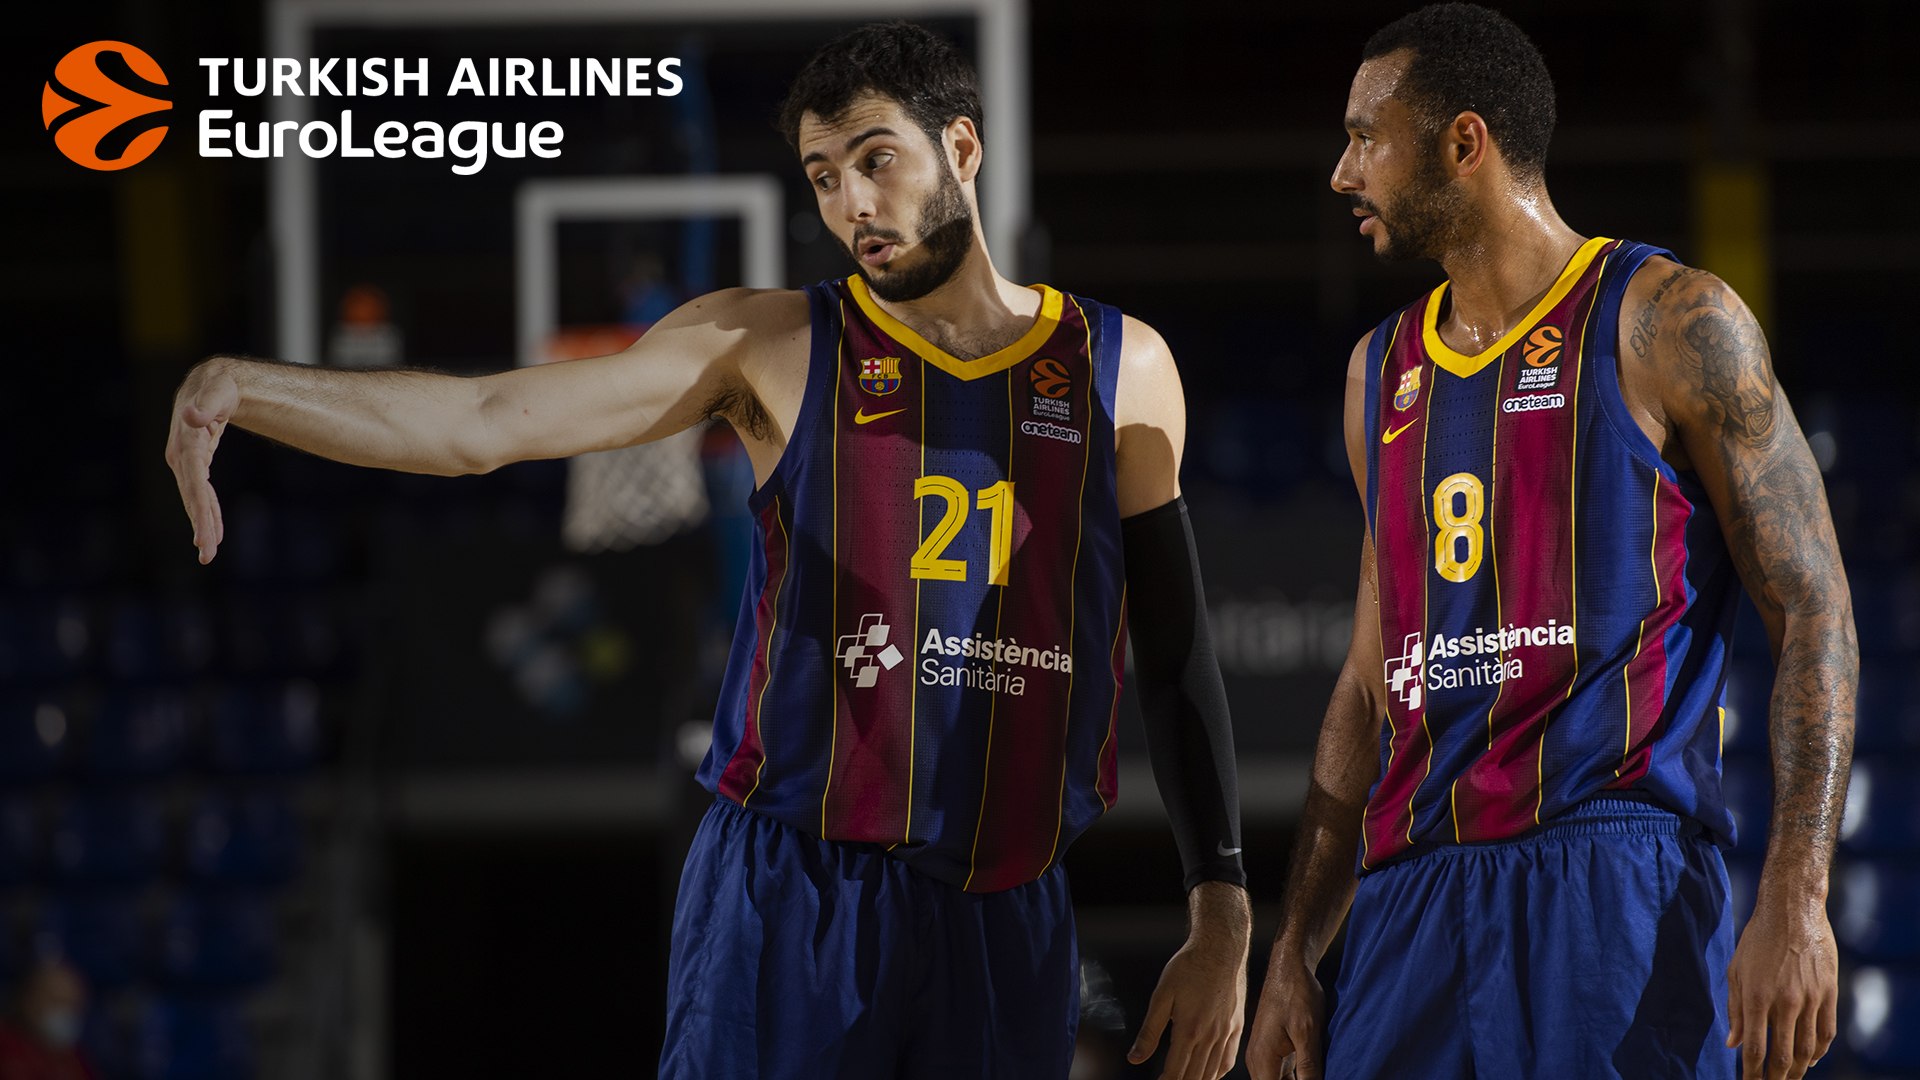 Once again smiling, Abrines stepped up for Barcelona - video Dailymotion